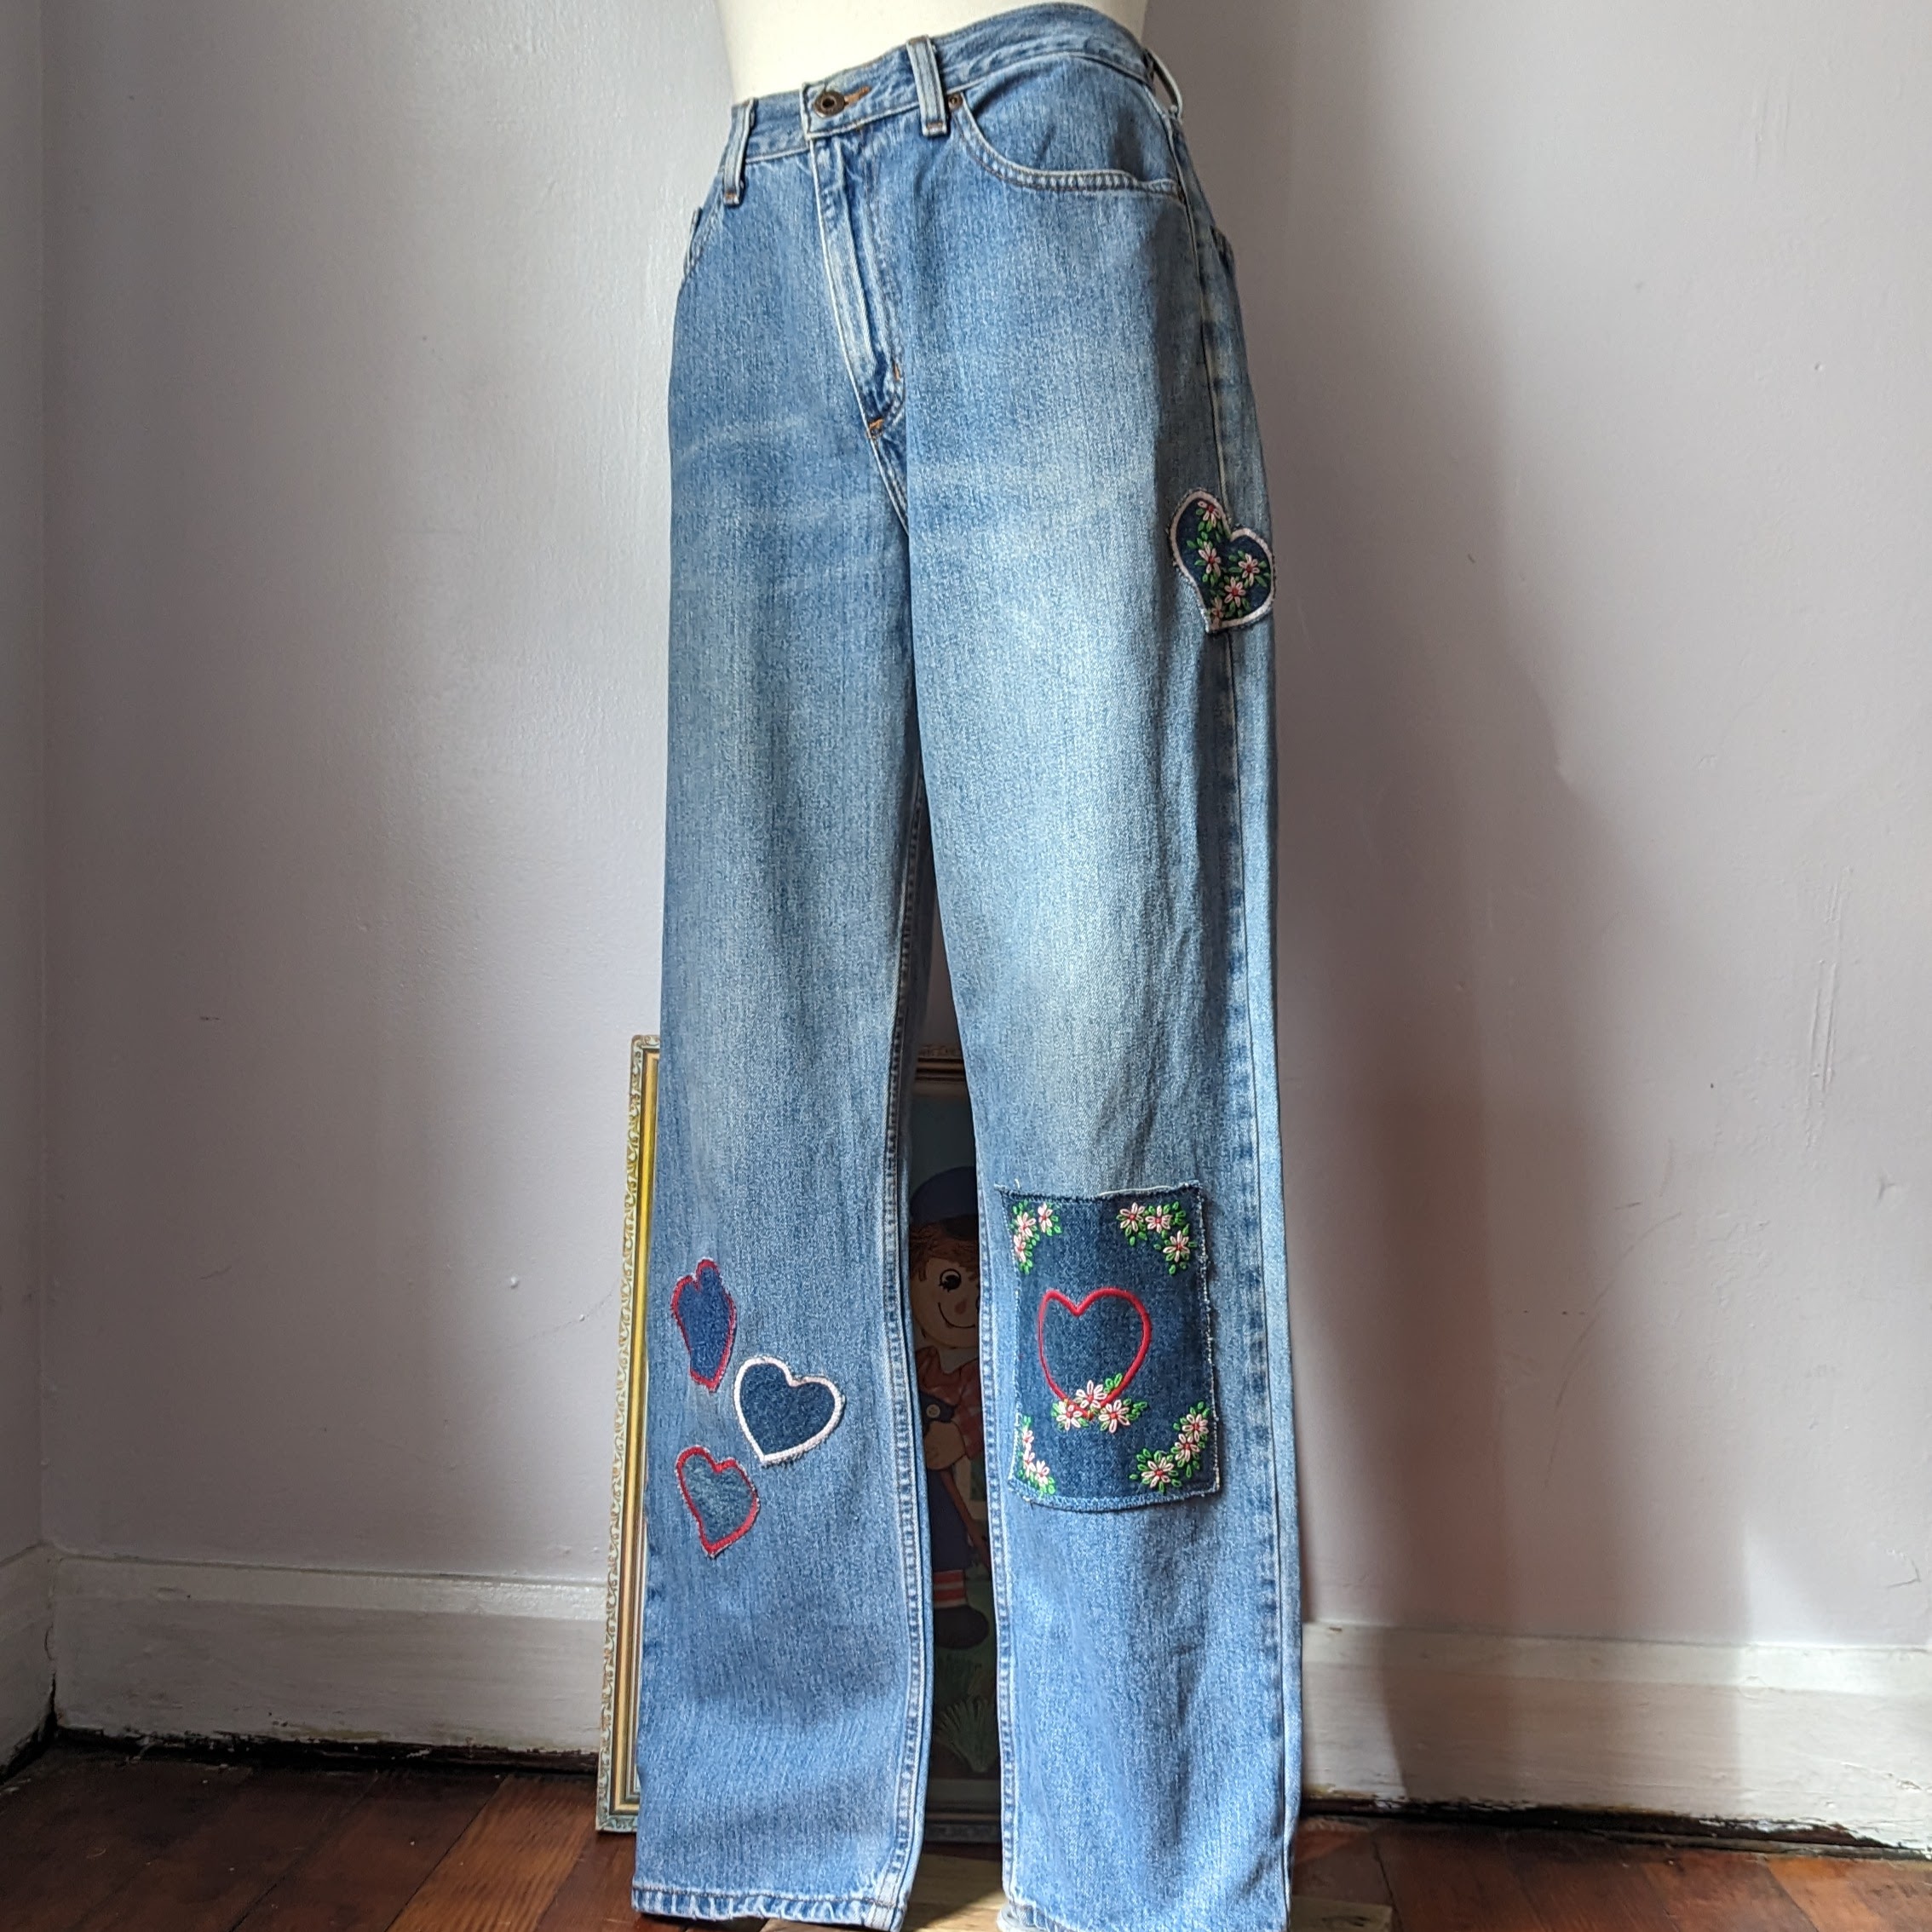 DIY : Embroidery on jeans 😍, how to embroider jeans